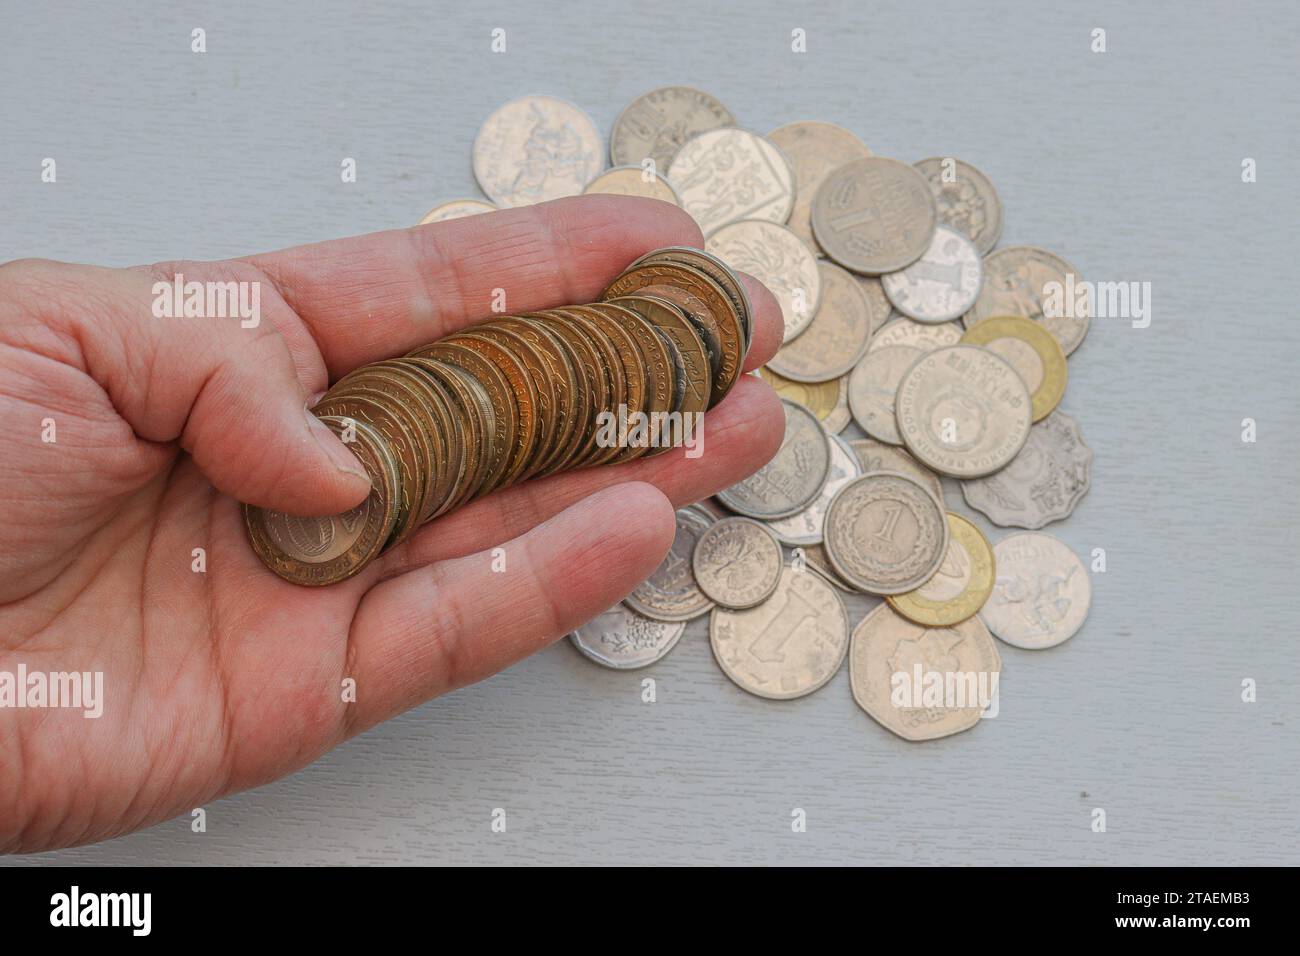 The left male hand holds bimital coins on a light gray background and other various coins in the palm. Stock Photo